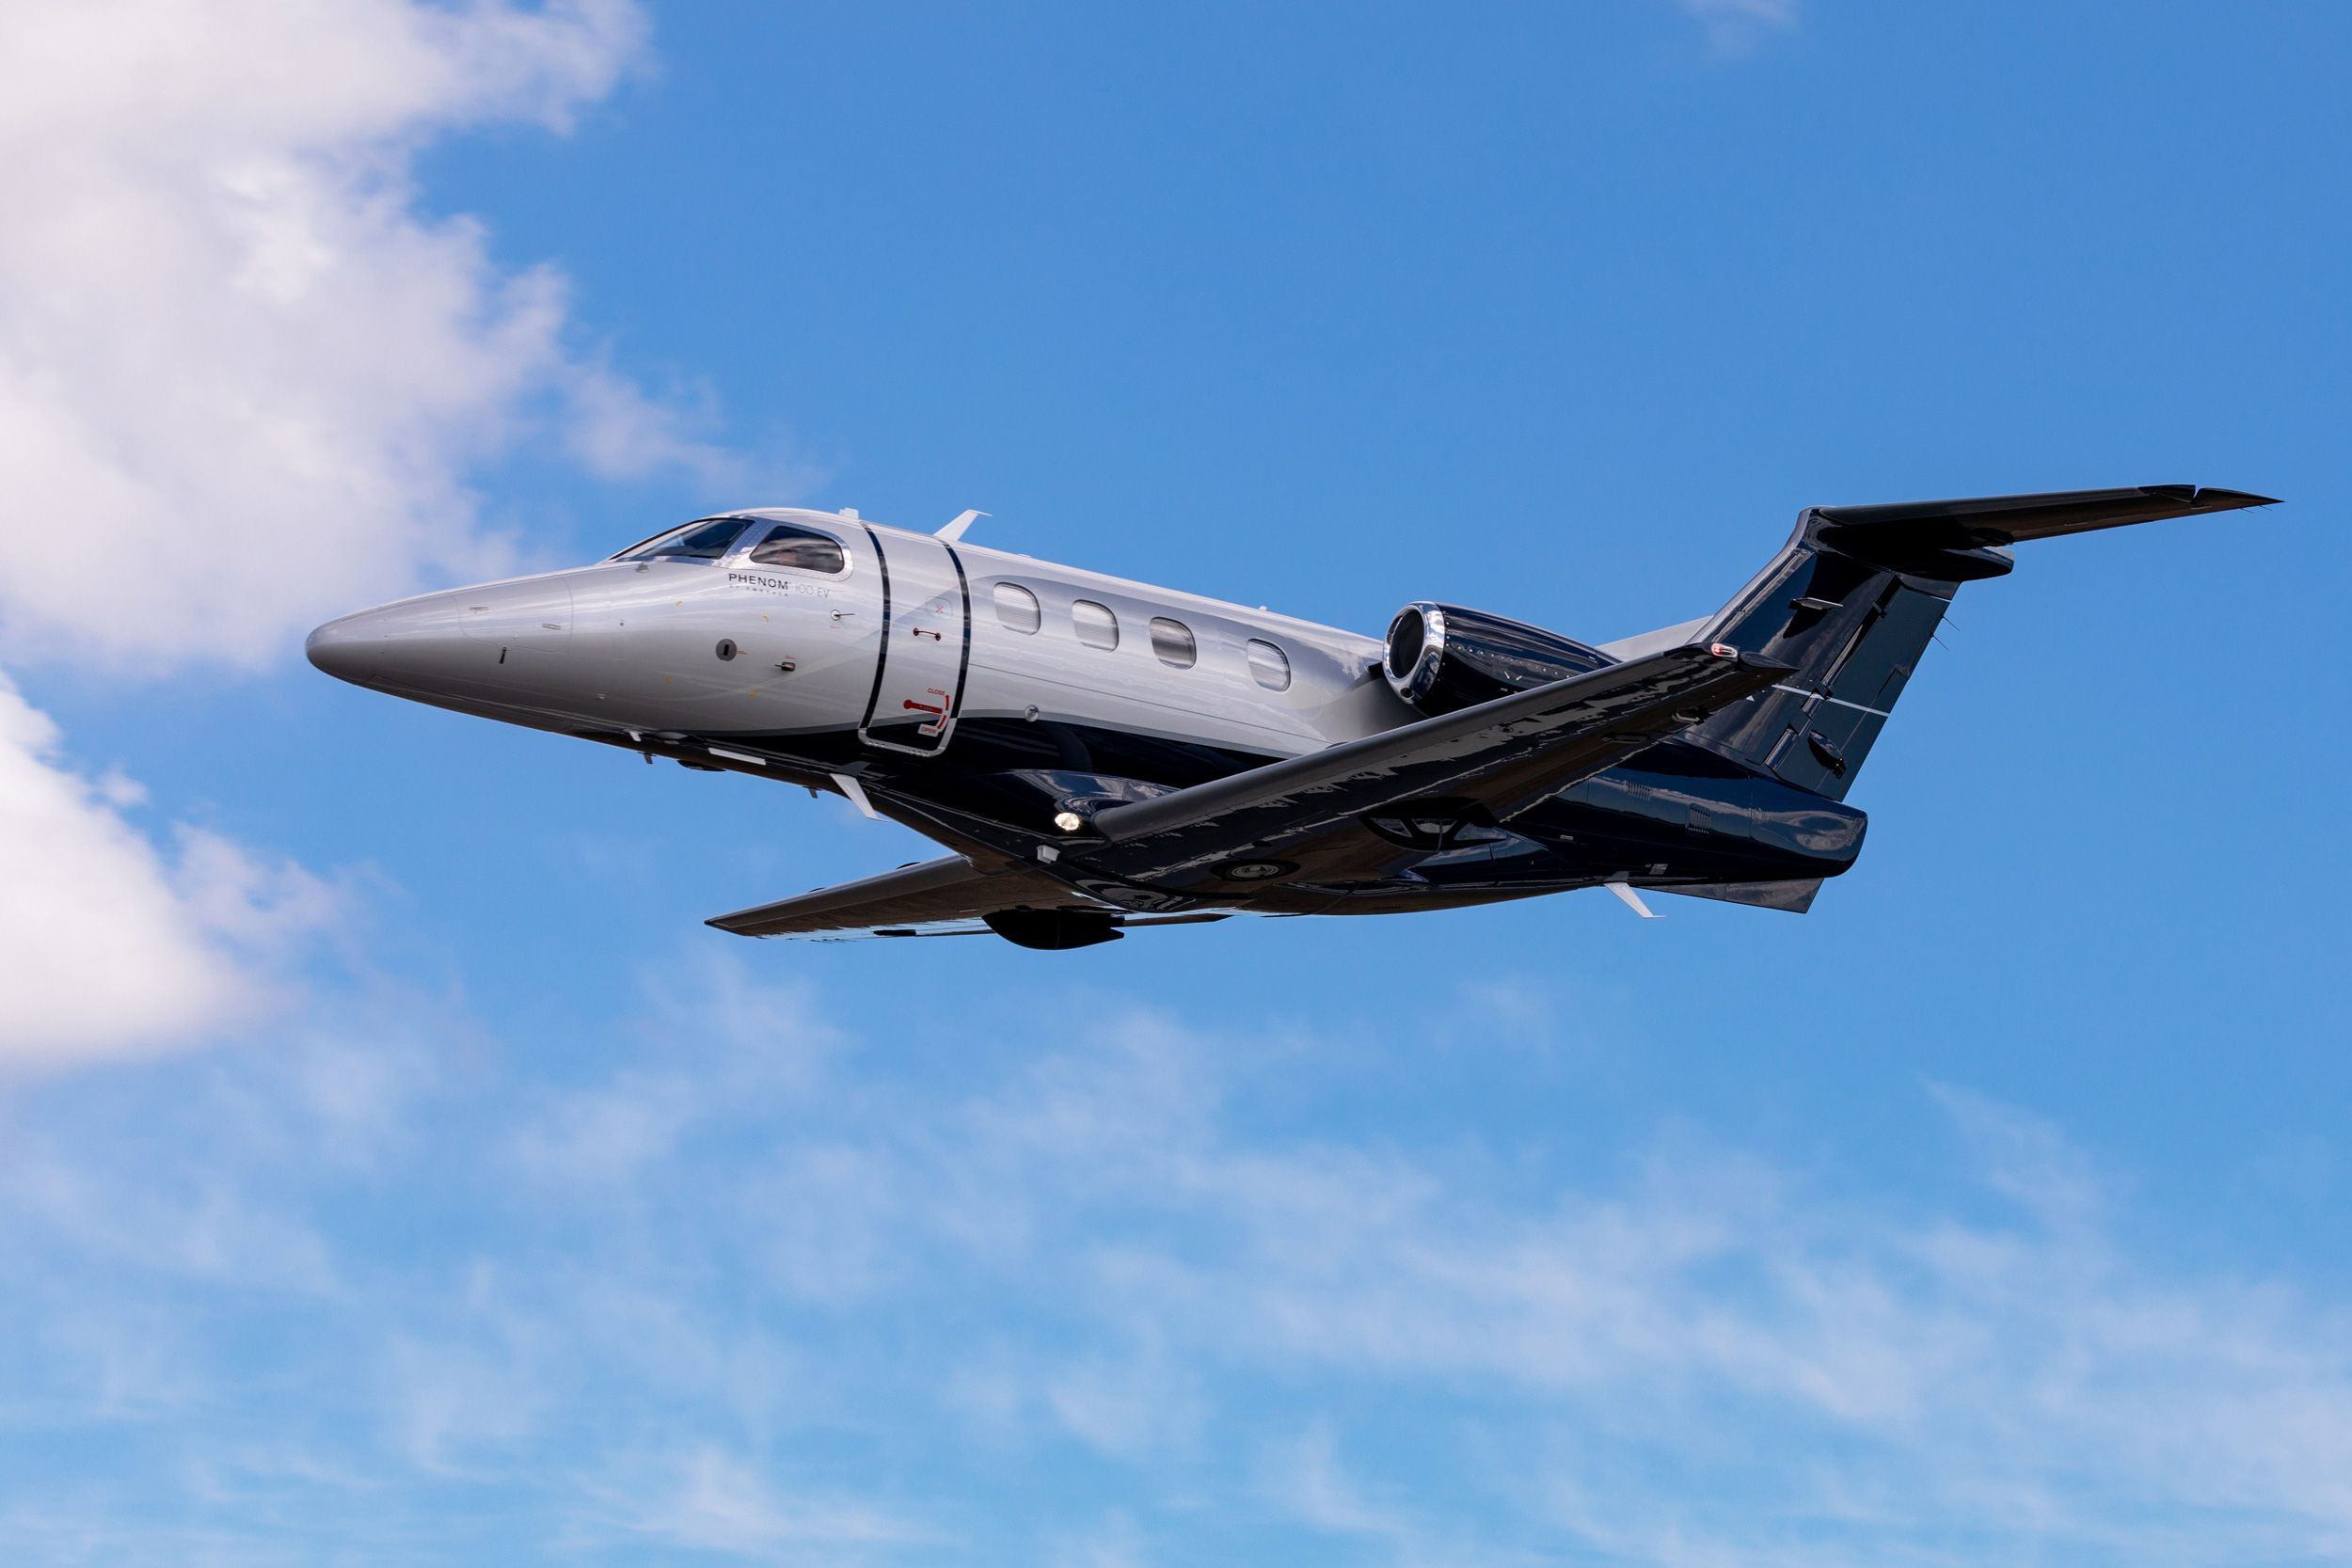 An Embraer Phenom 100EV business jet flying in the sky.